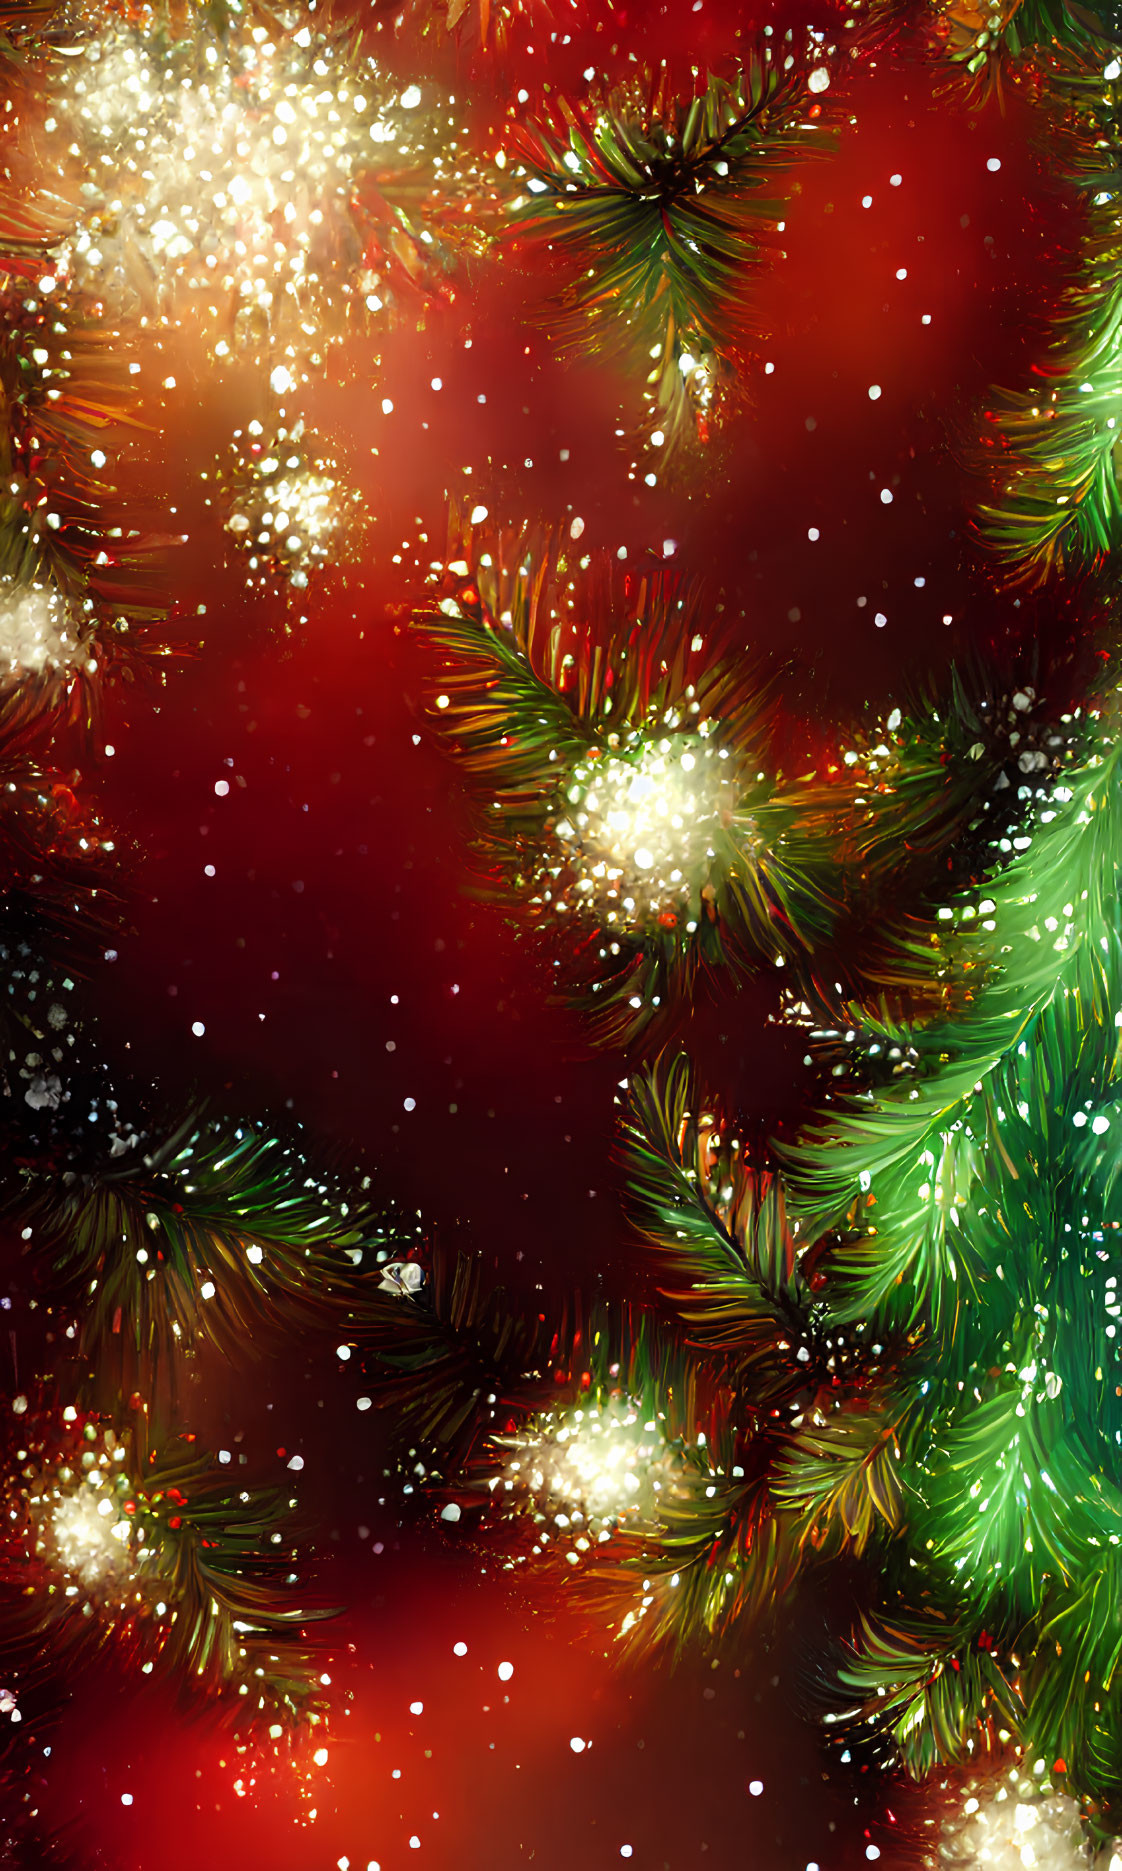 Snowflakes and Pine Branches on Red Background for Festive Holiday Atmosphere